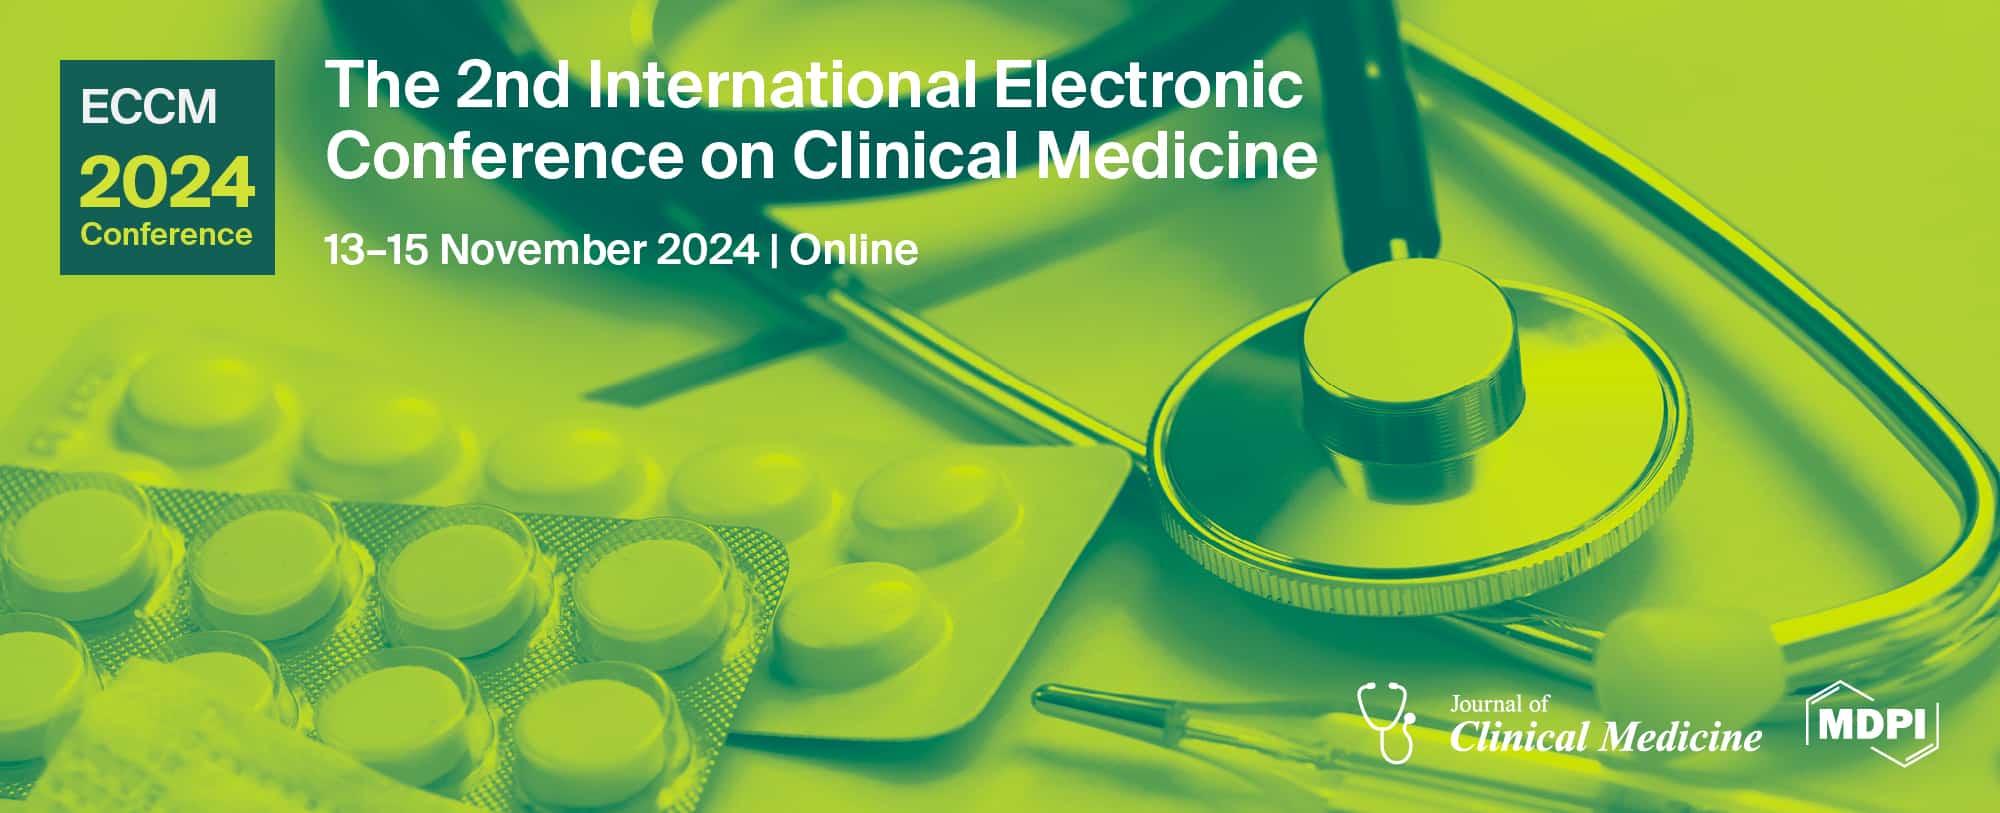 The 2nd International Electronic Conference on Clinical Medicine